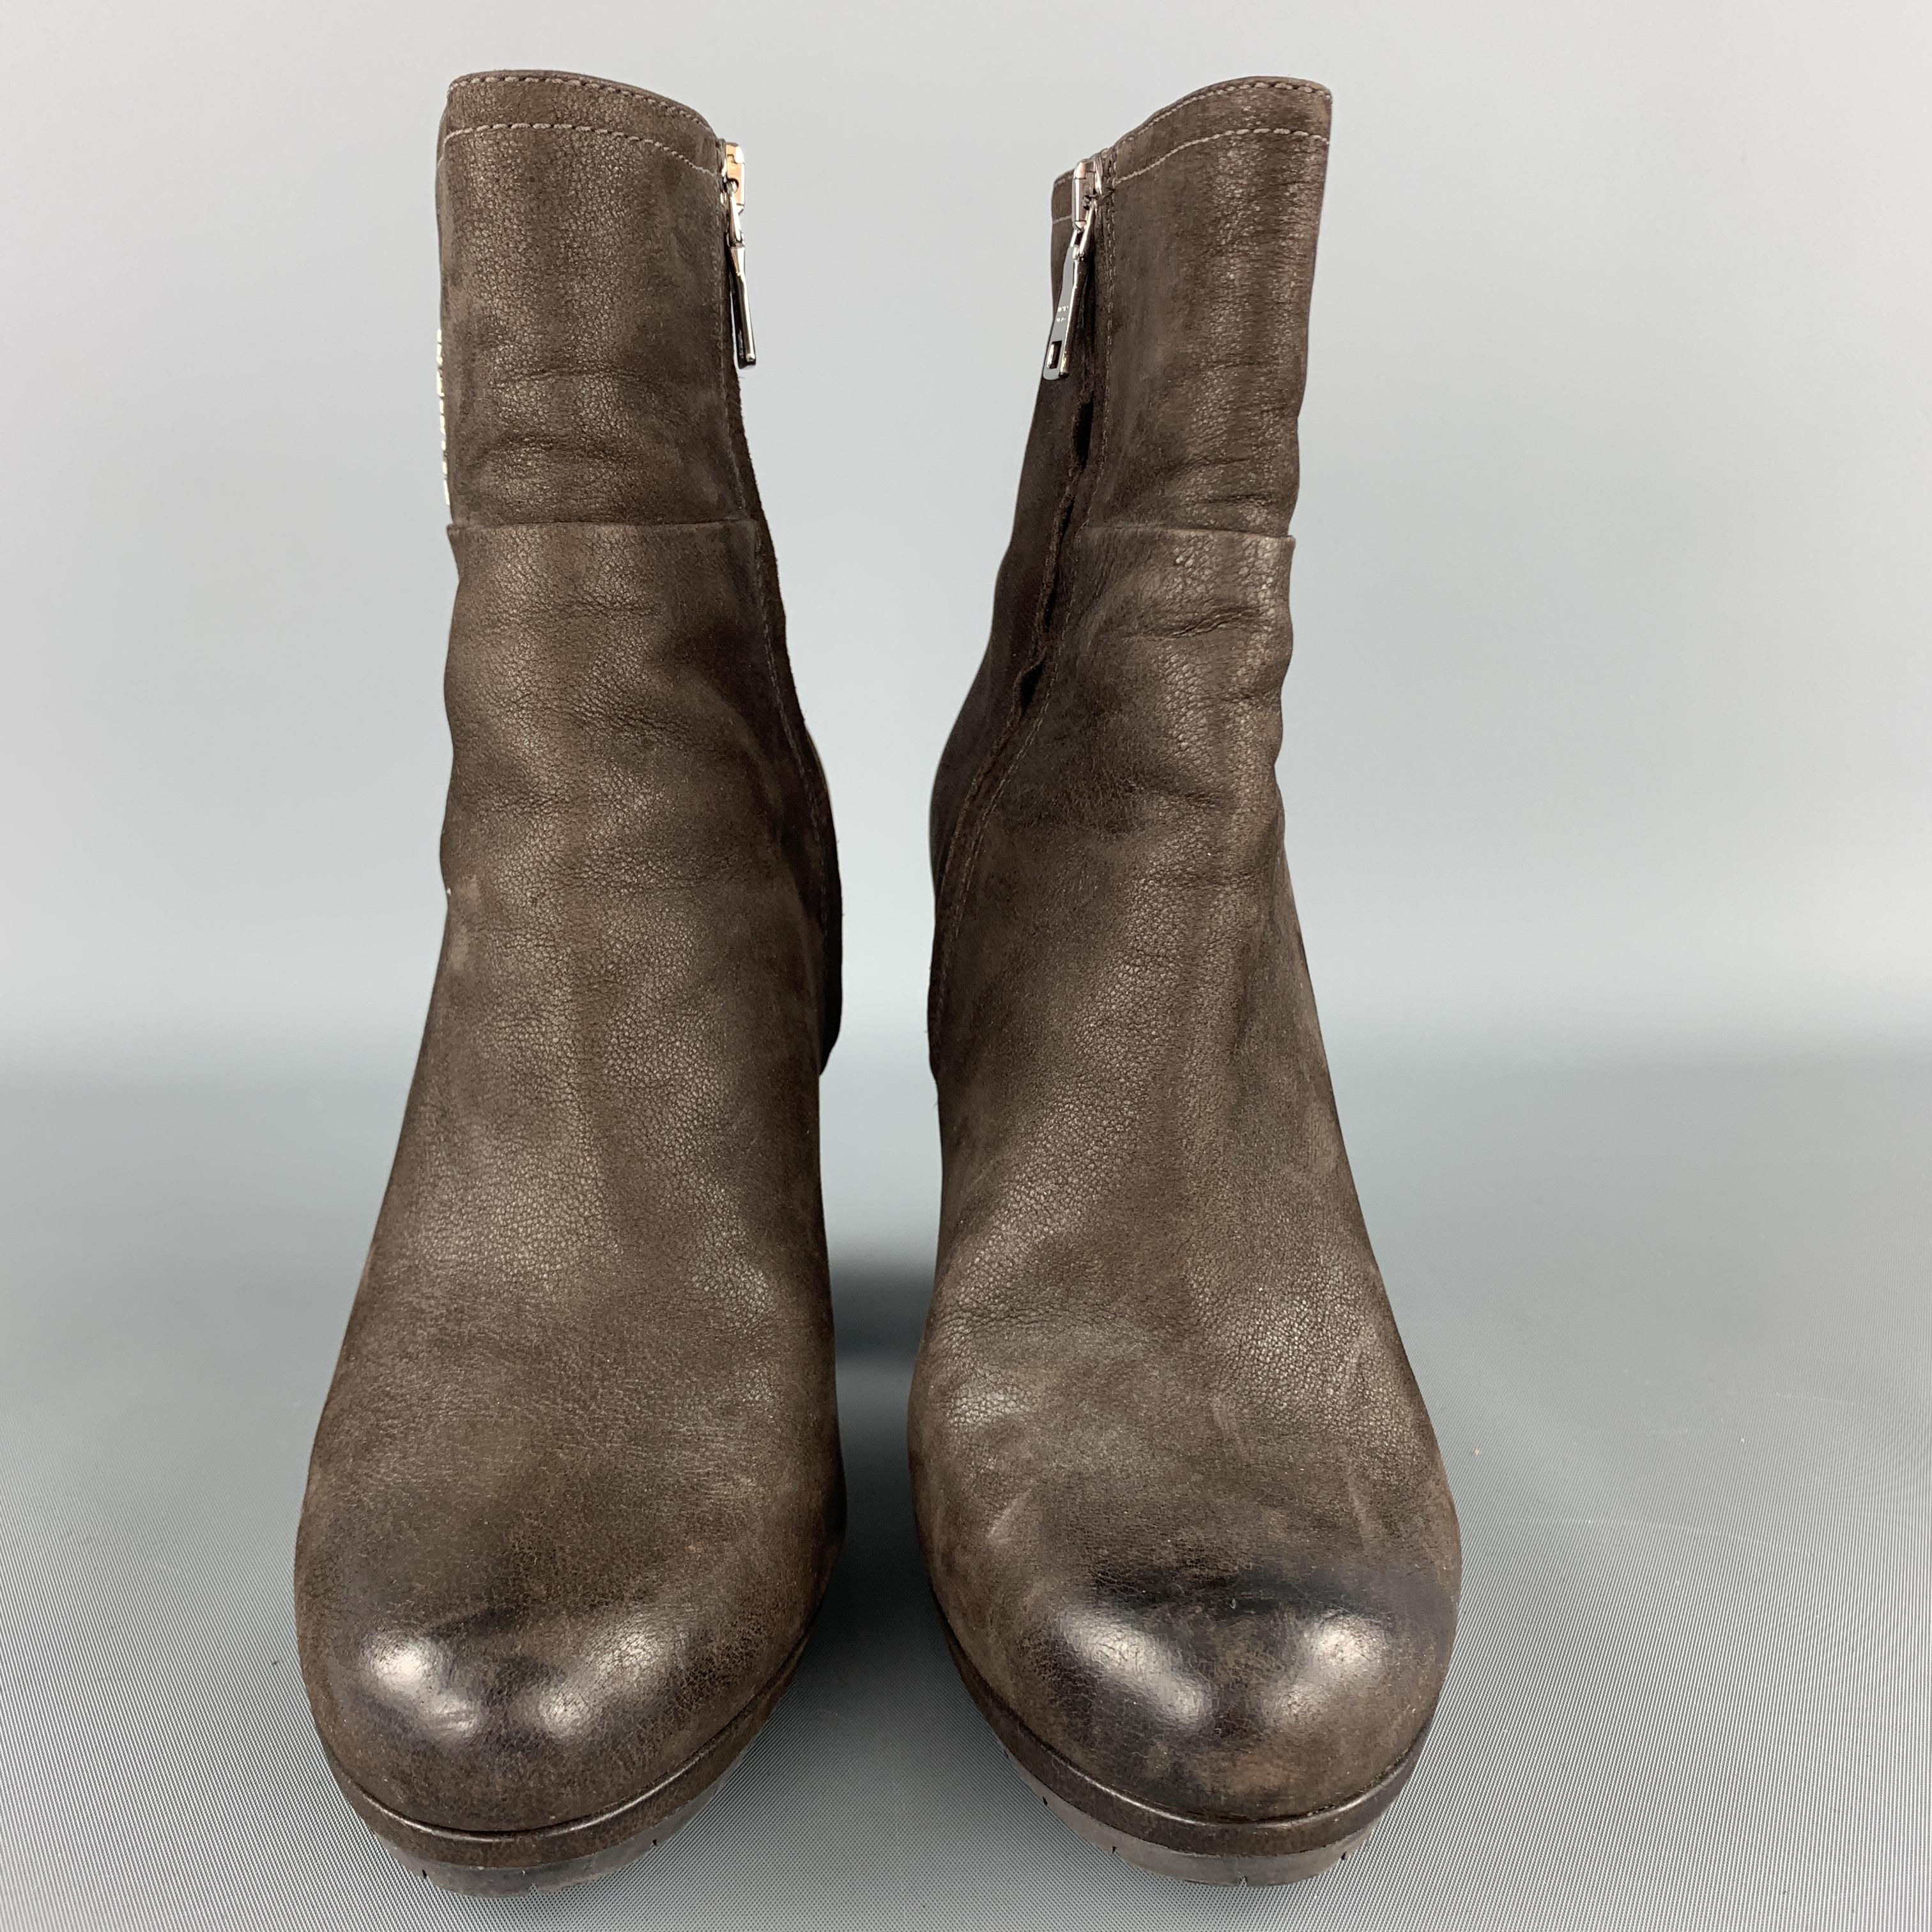 PRADA ankle booties come in textured brown leather with a silver tone logo shaft and chunky heeled sole. 

Very Good Pre-Owned Condition.
Marked: IT 37.5

Heel: 4 in.
Length: 5 in.